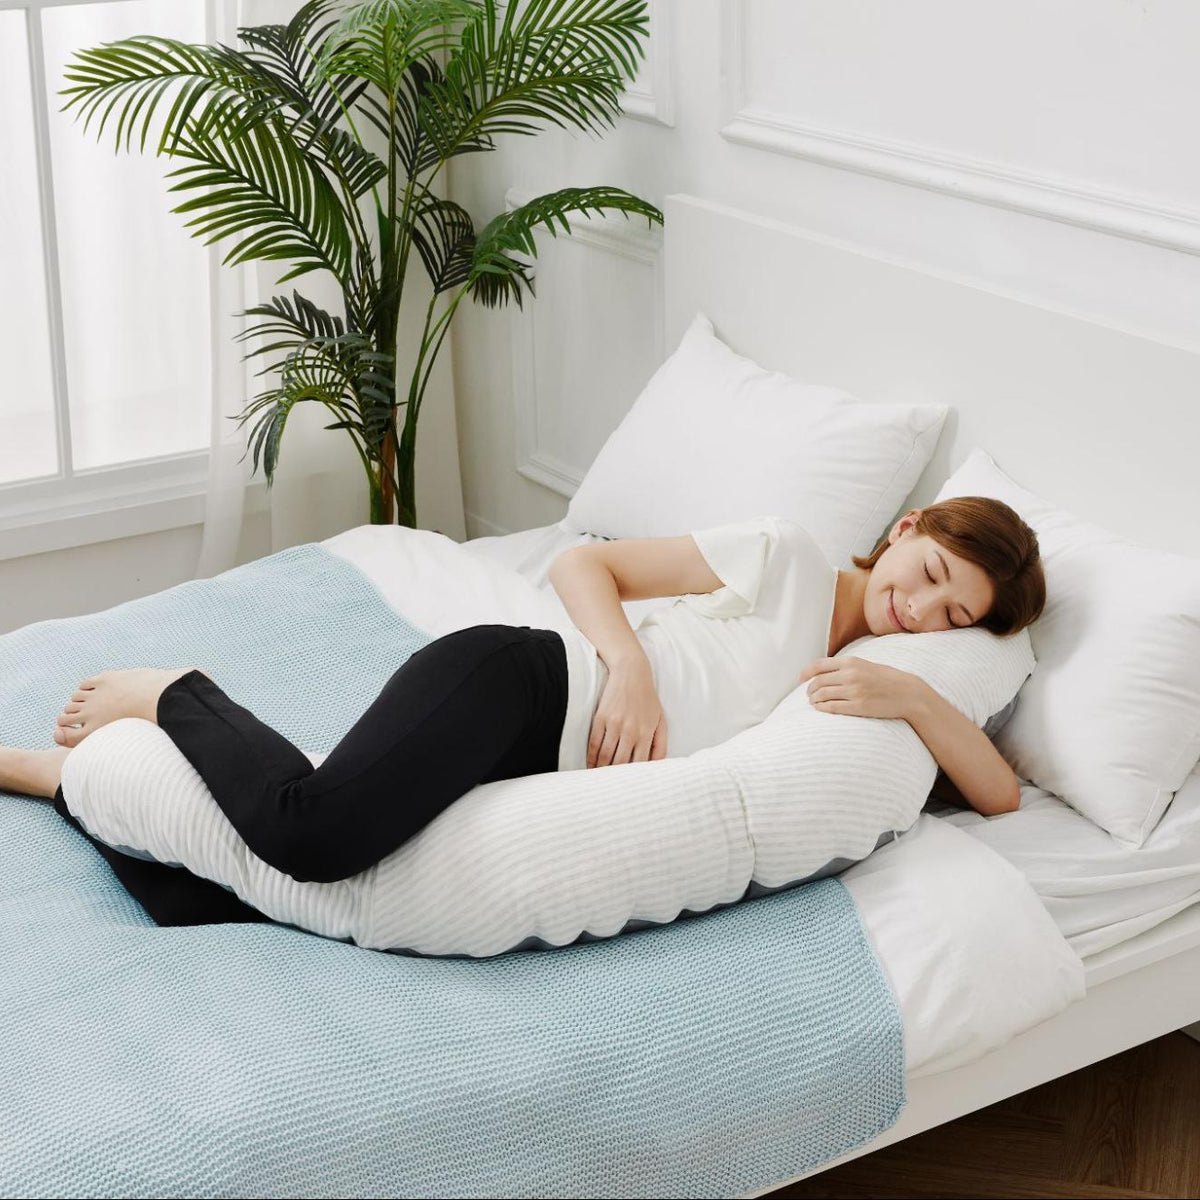 Best pregnancy pillows to shop in 2023 for support, comfort and to combat back  pain